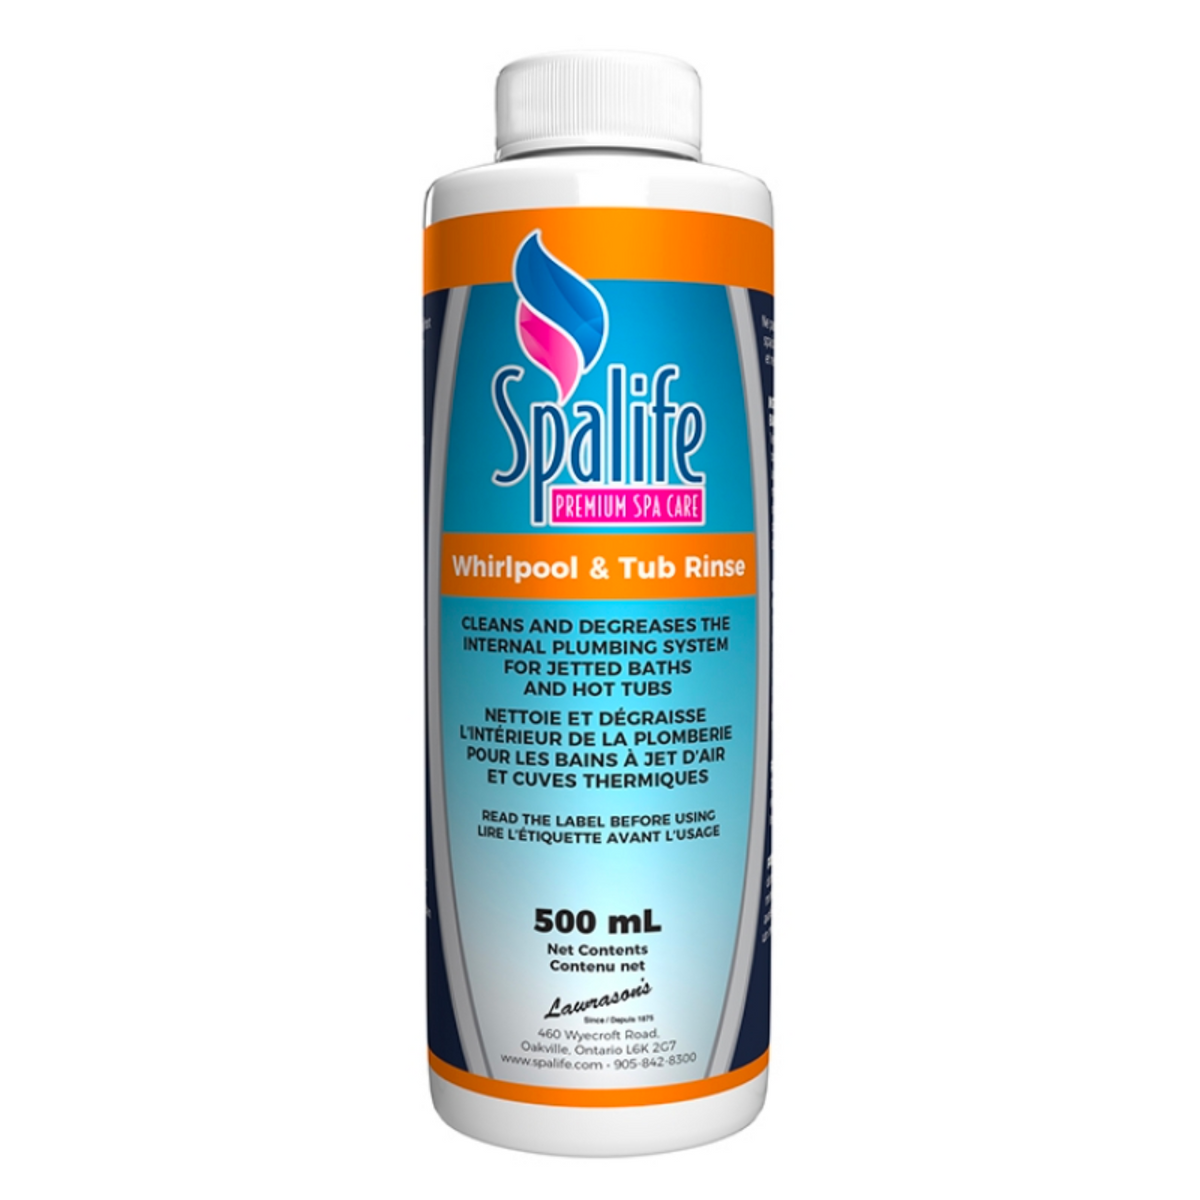 Spa Life Whirlpool & Tub Rinse - Cleaner & Degreaser